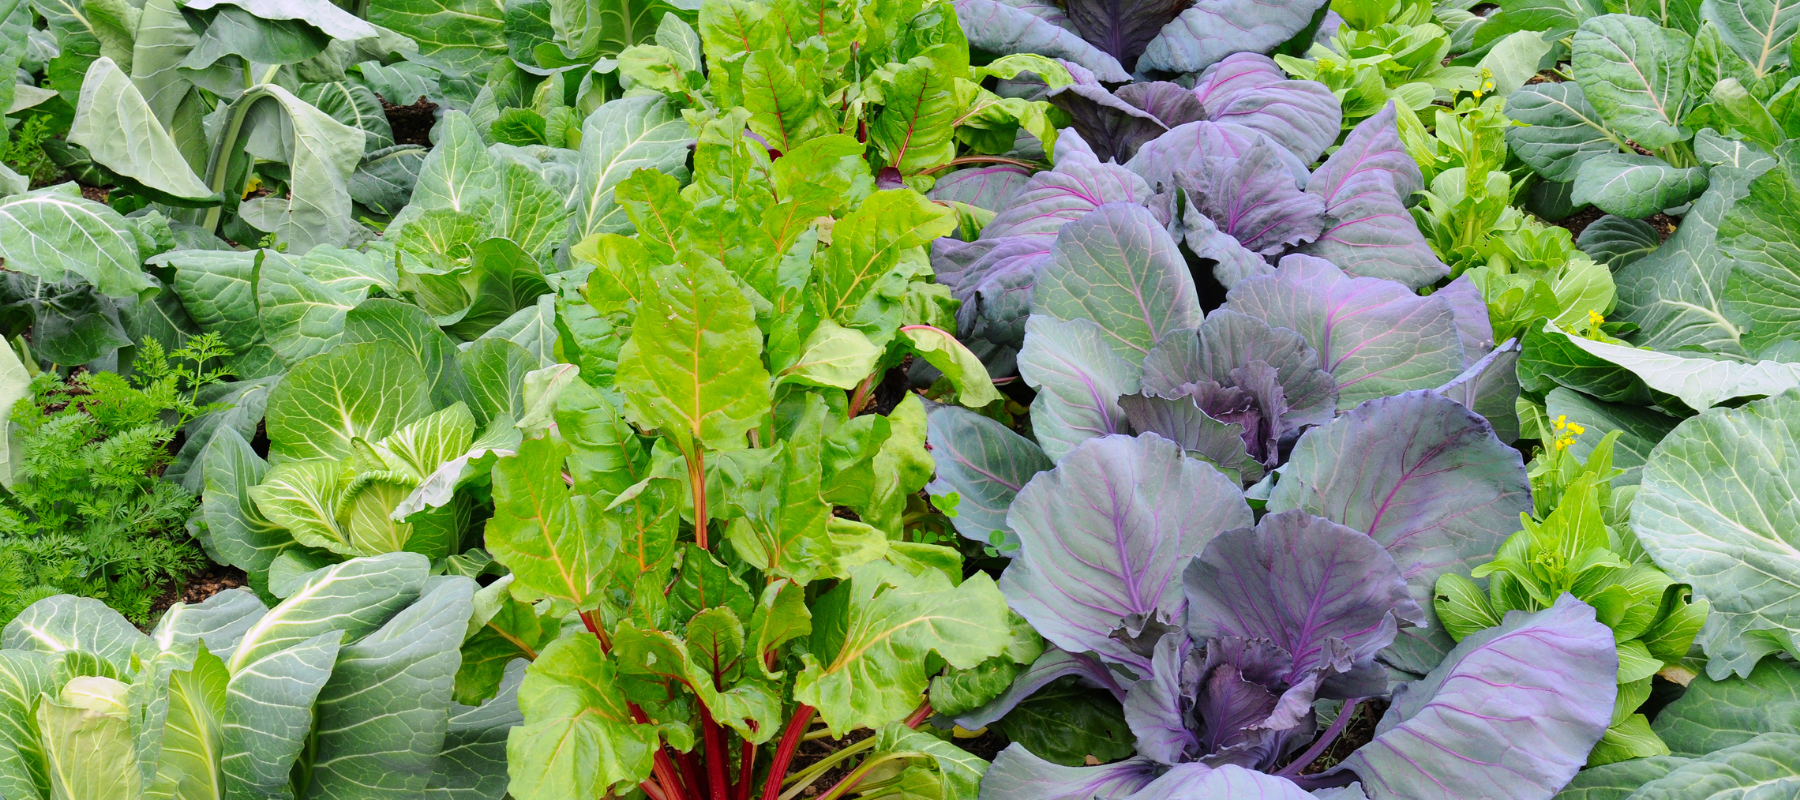 Growing your own winter vegetables